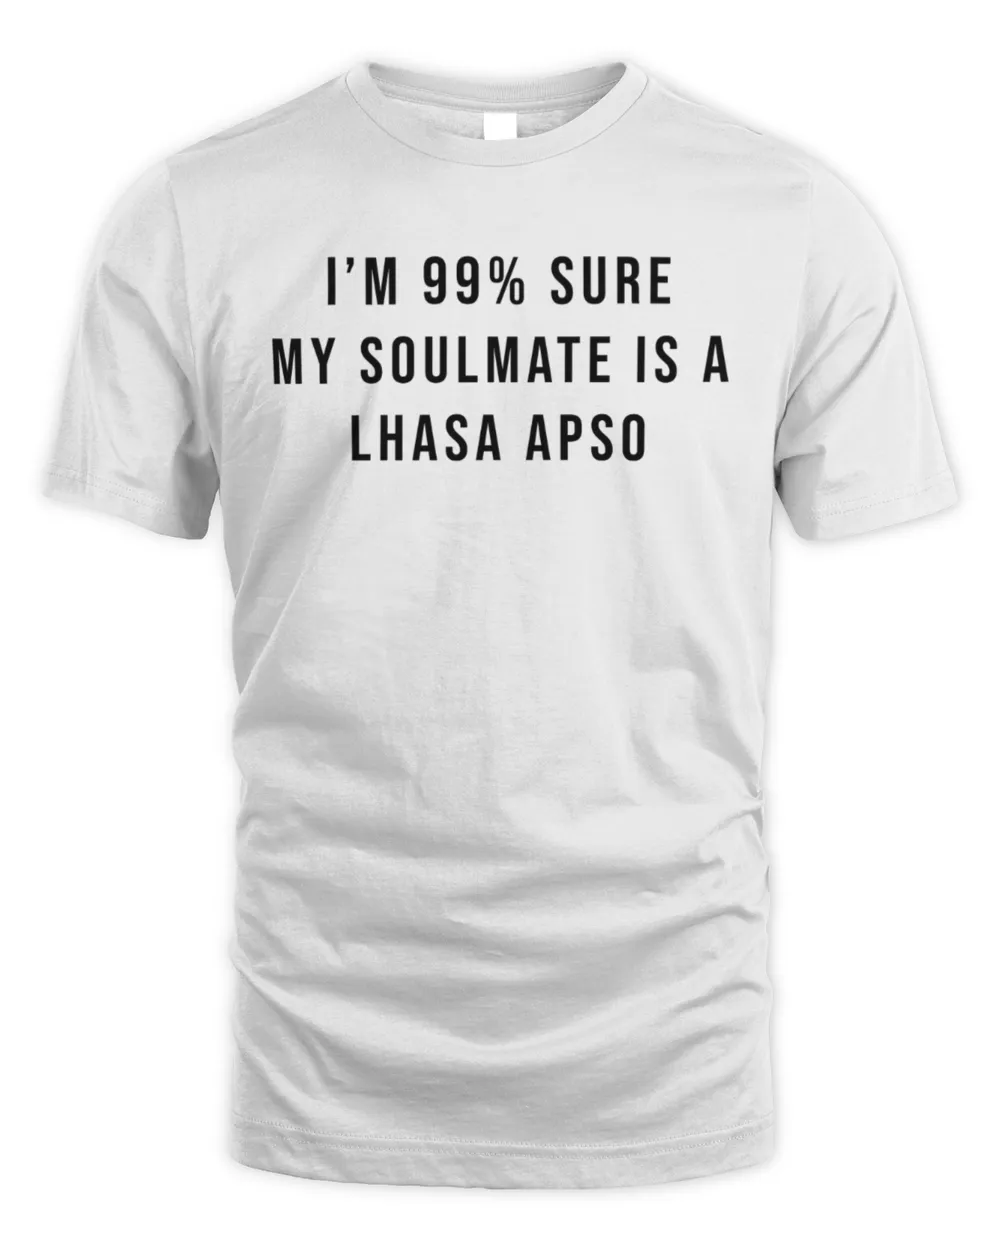 My Soulmate Is A Lhasa Apso